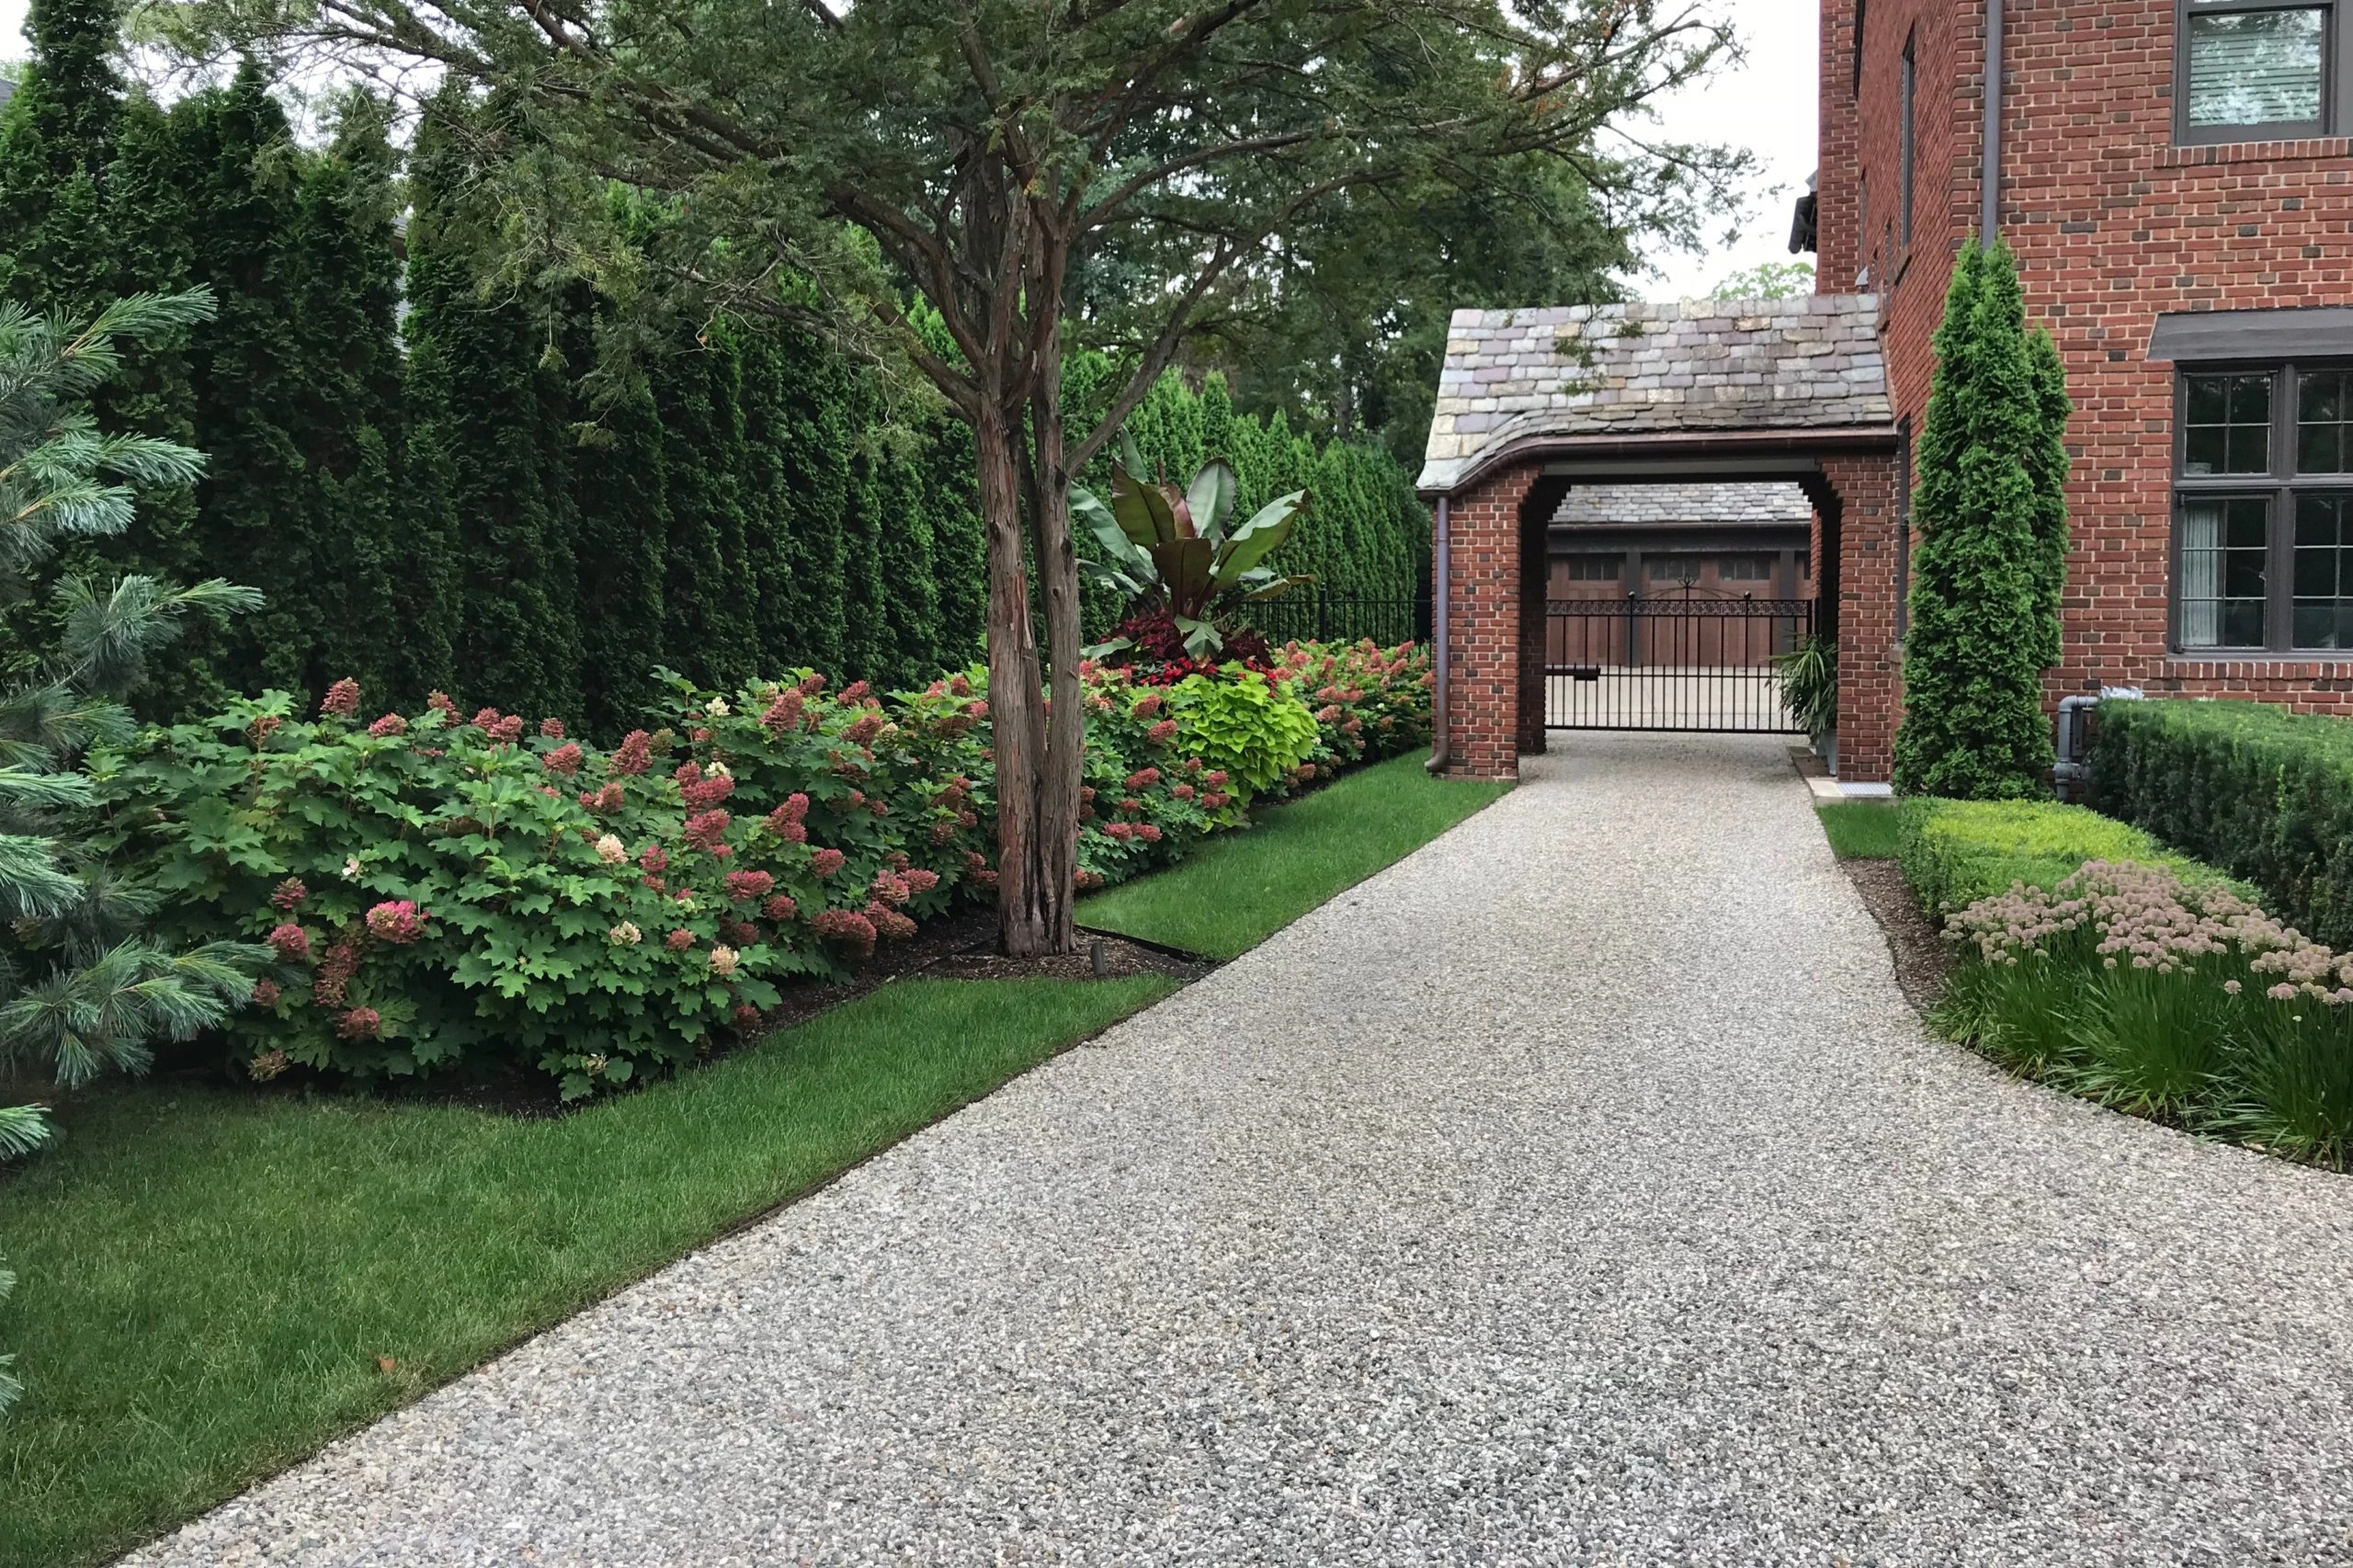 A crushed stone driveway featuring natural textures and earthy tones, adding rustic charm to the landscape.